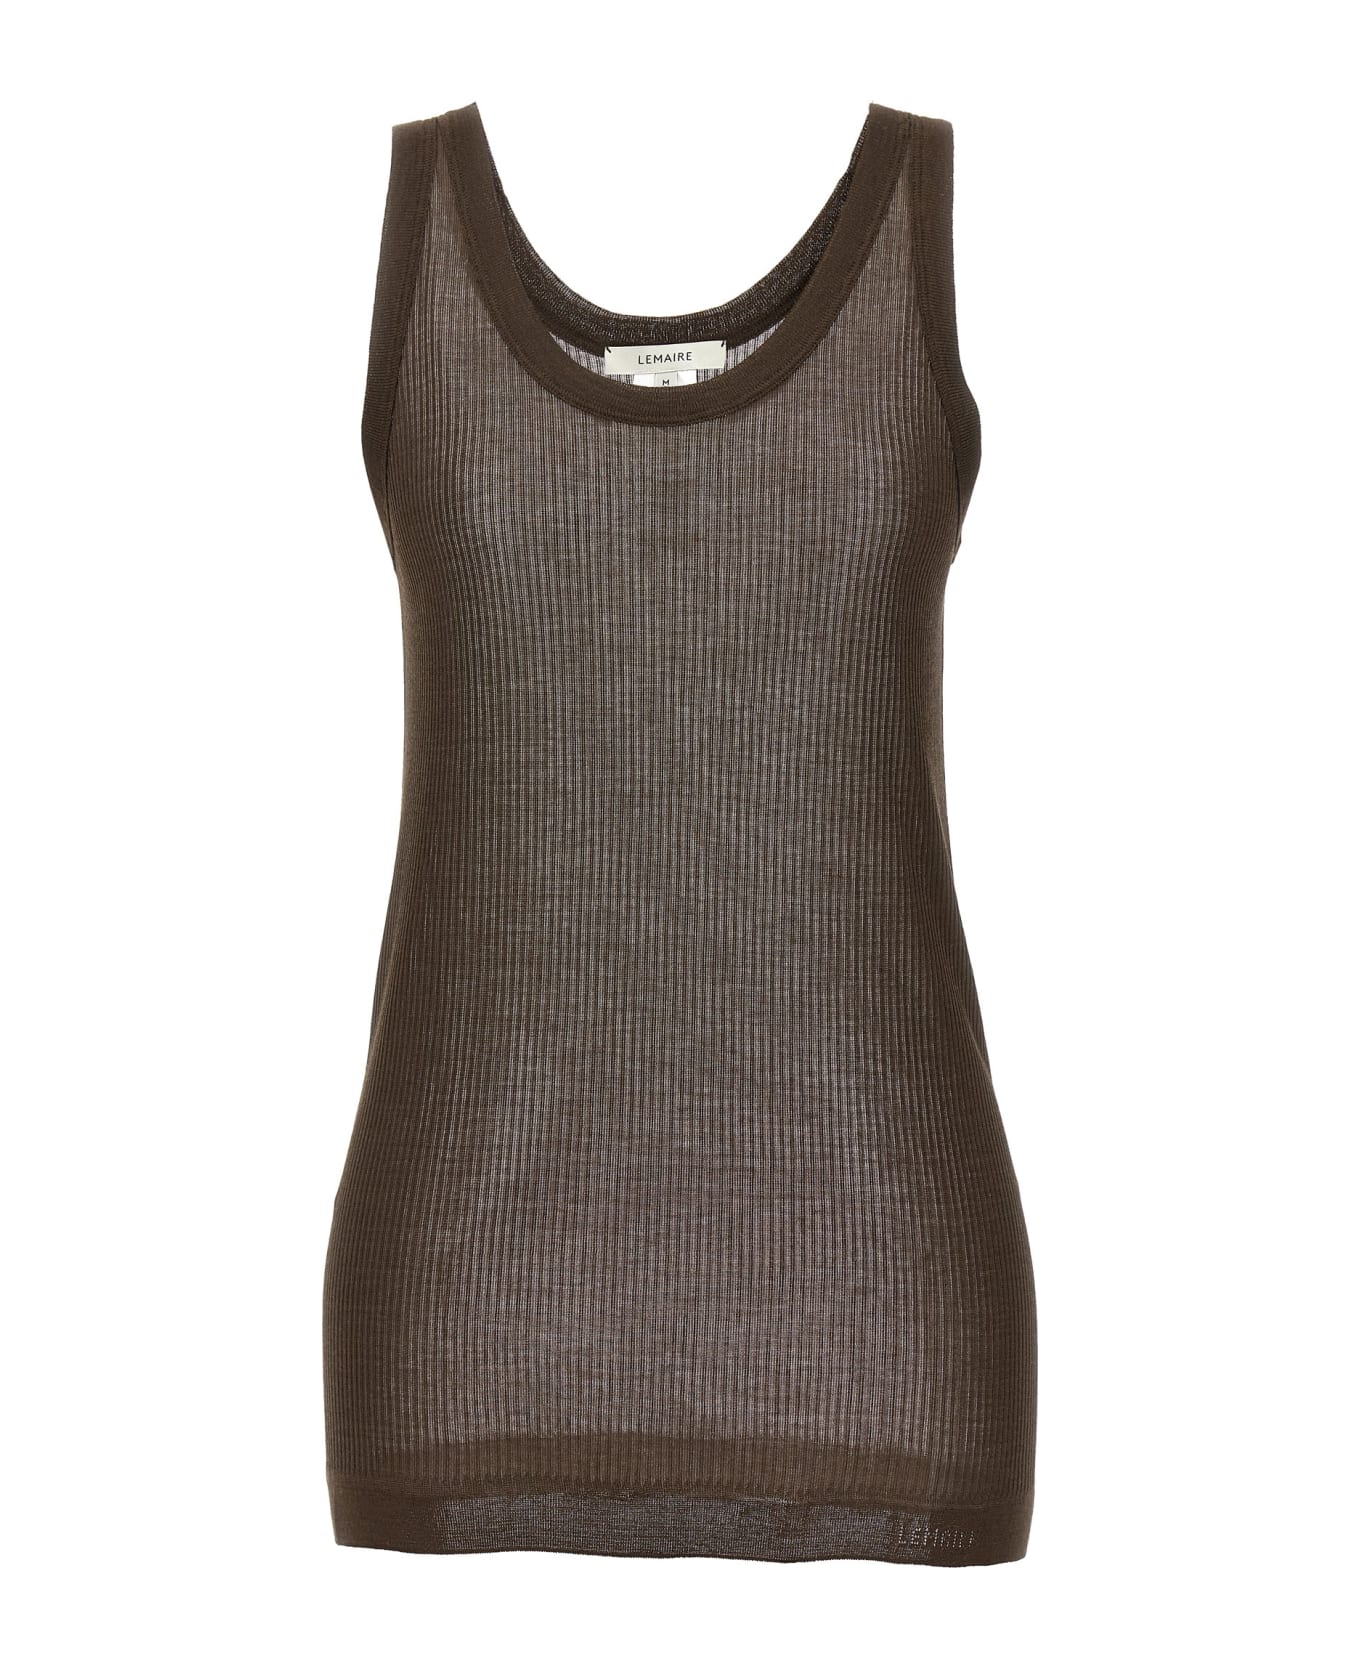 Lemaire 'seamless Rib' Tank Top - BROWN